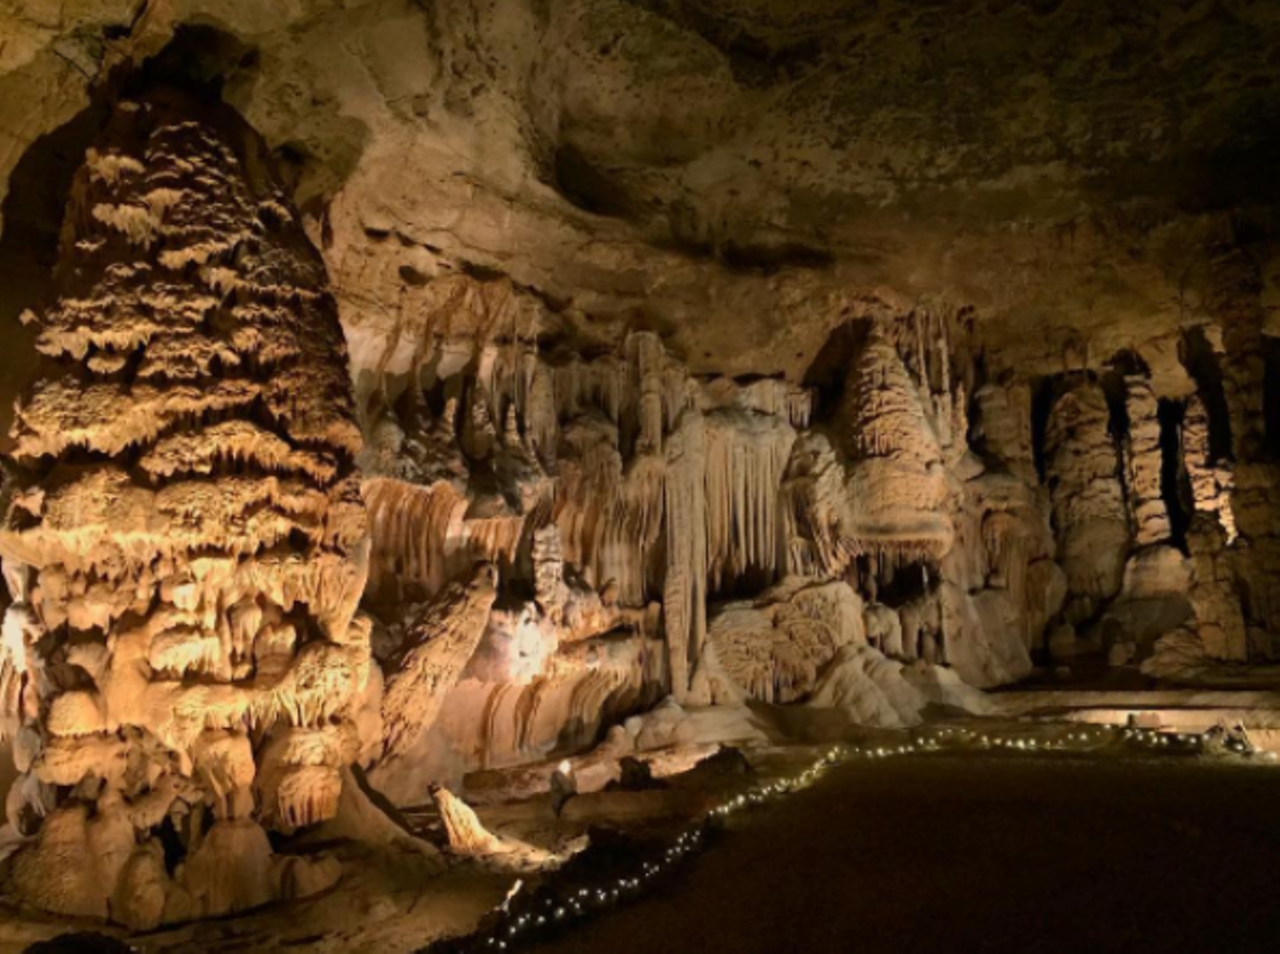 Cave Without a Name
325 Kreutzberg Rd., Boerne,  cavewithoutaname.com
Eleven miles Northeast of Boerne, Cave Without a Name is a living cavern that is open to visitors. In addition to touring the cave, guests can enjoy the walking trails, cut a geode and collect gemstones.
Photo via Instagram, lee_tor89